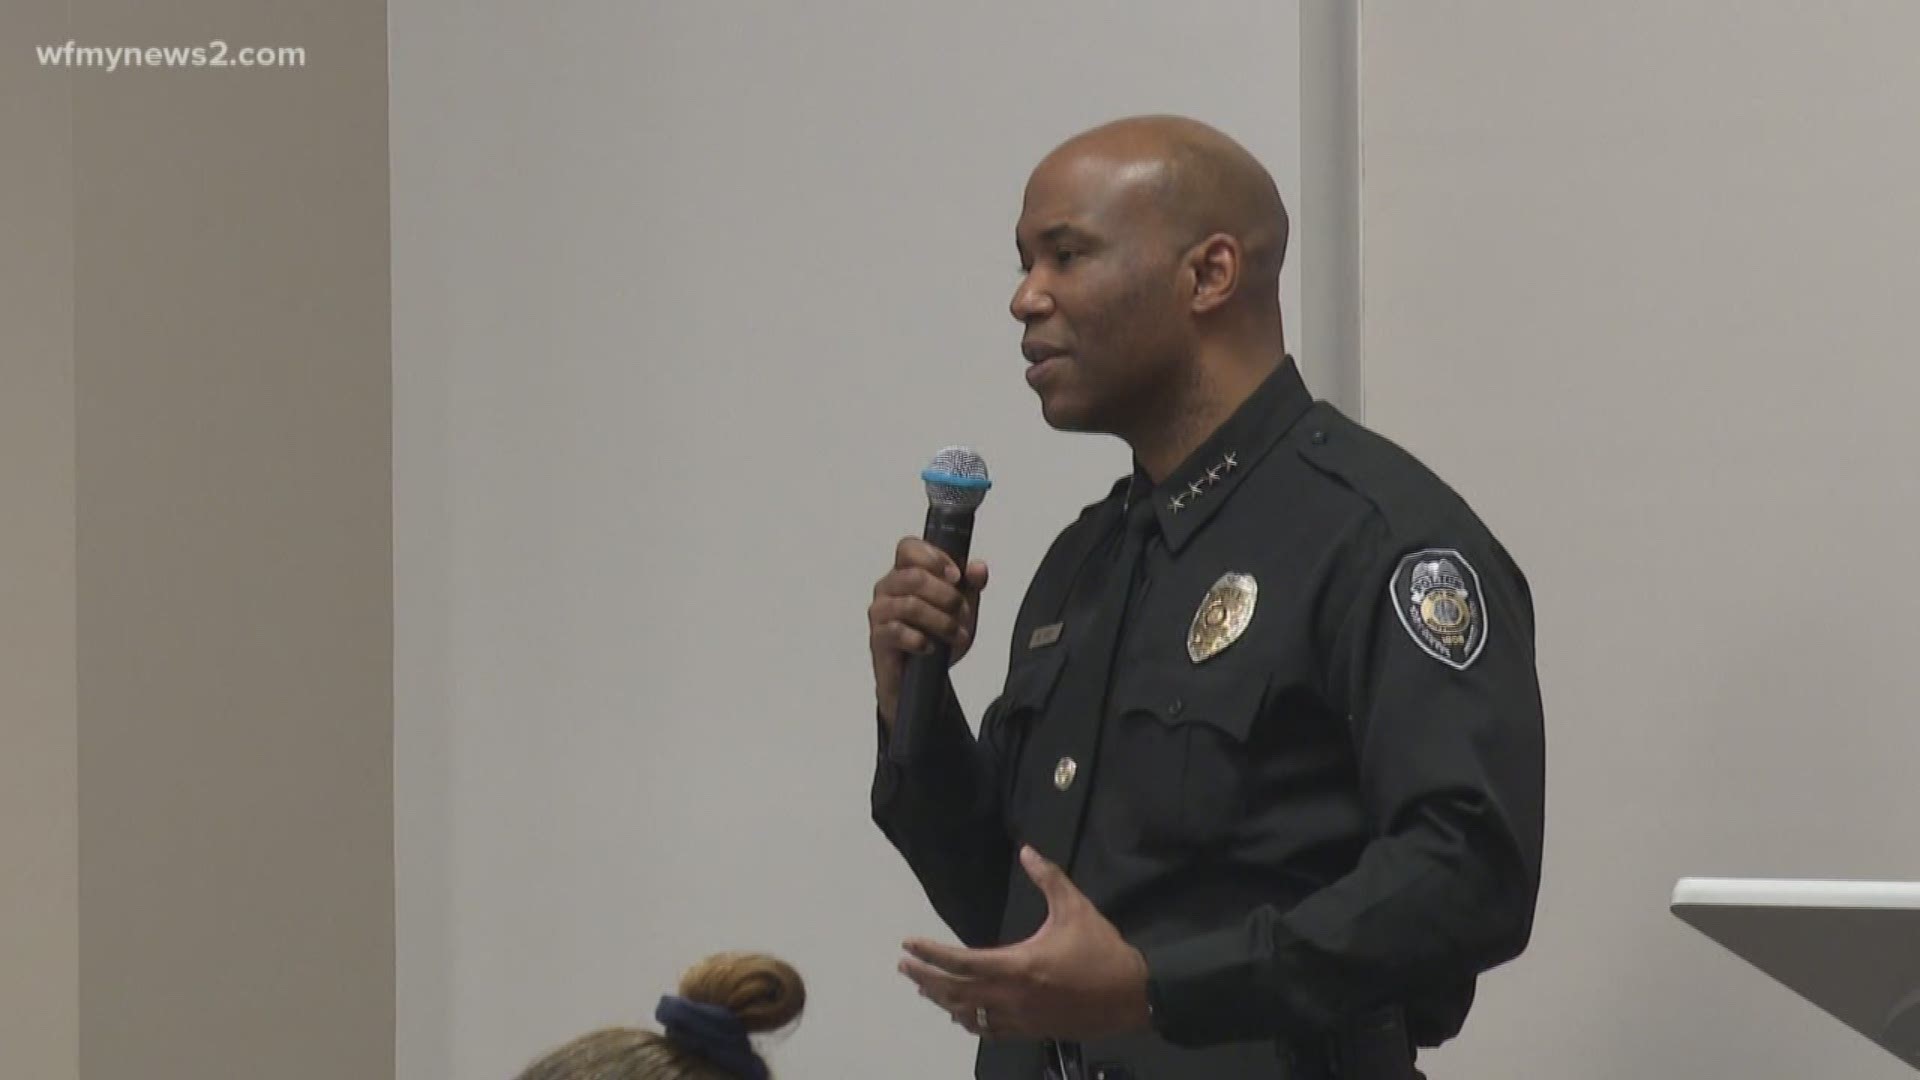 People asked about crime, community policing and traffic problems at the Barber Events Center. It's the first of many public forums with the new chief this month.